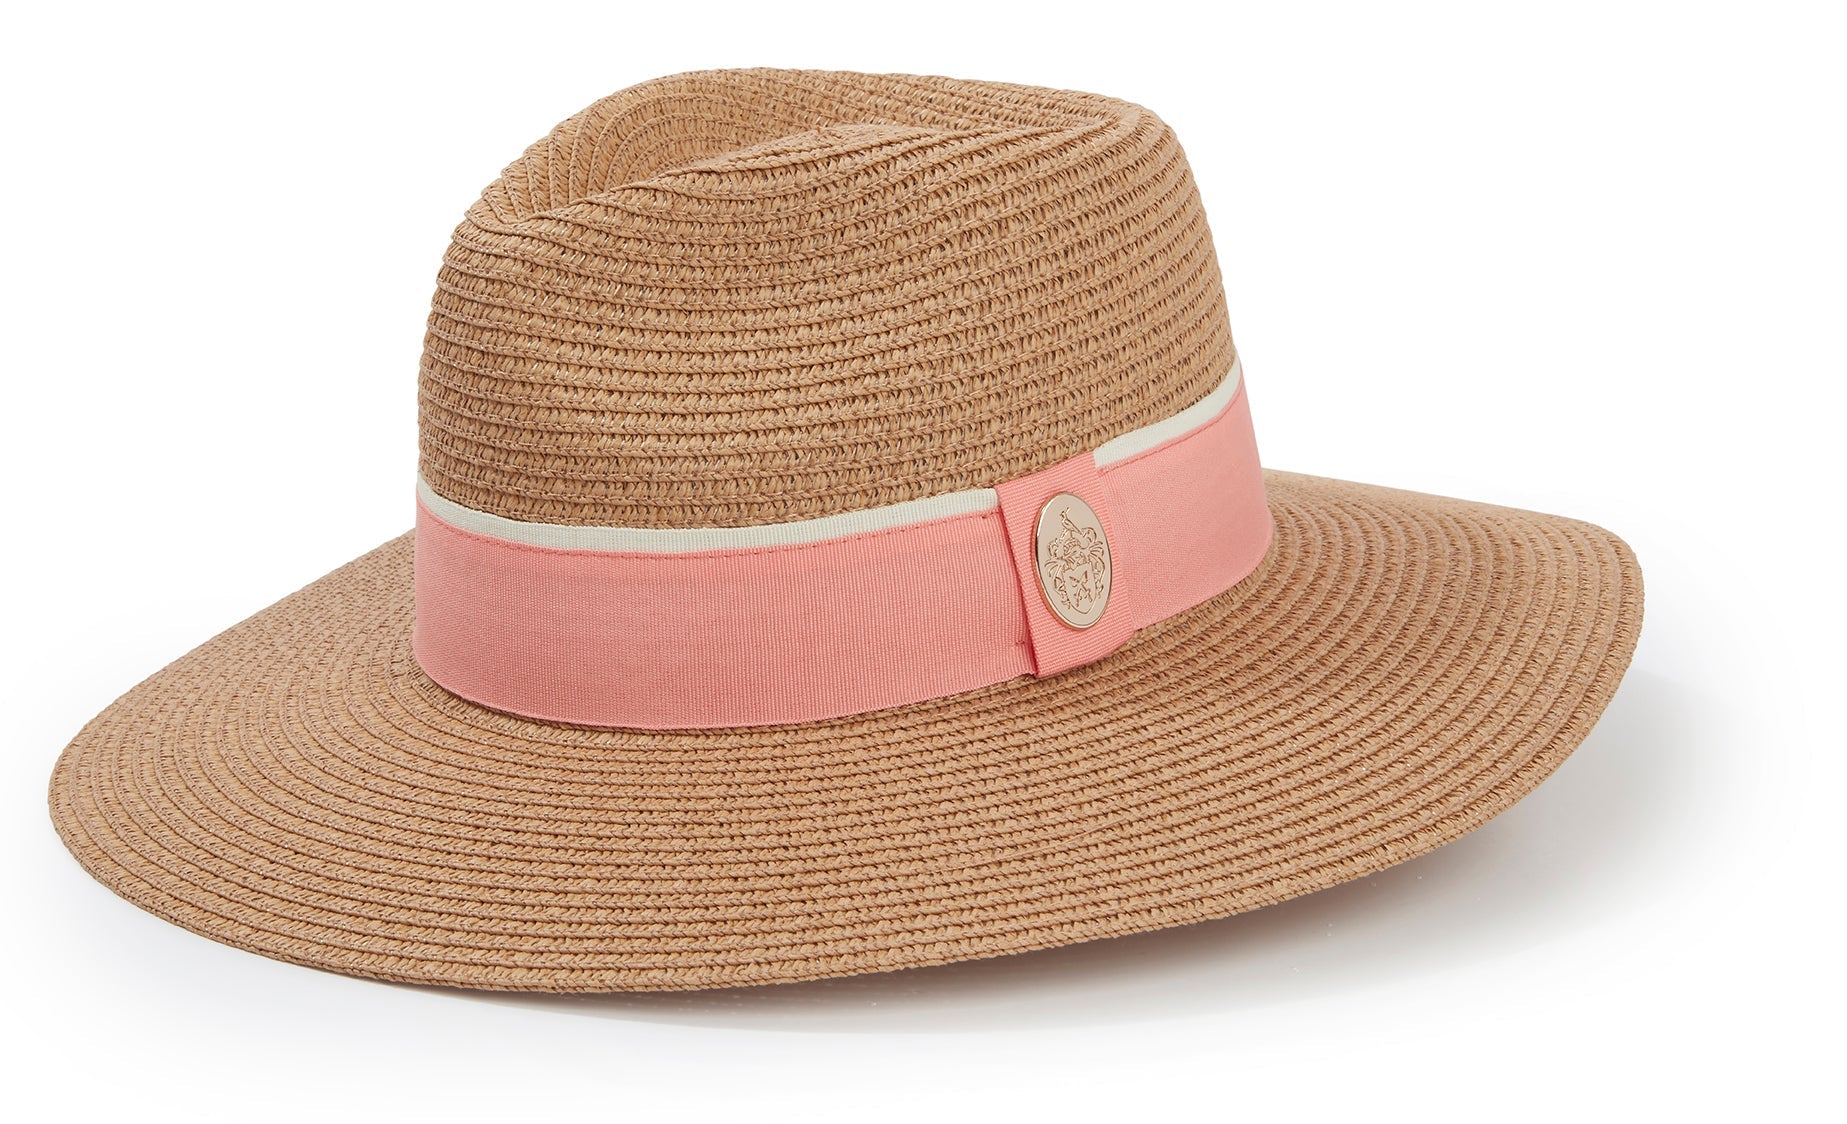 The Hemley Fedora in Coral